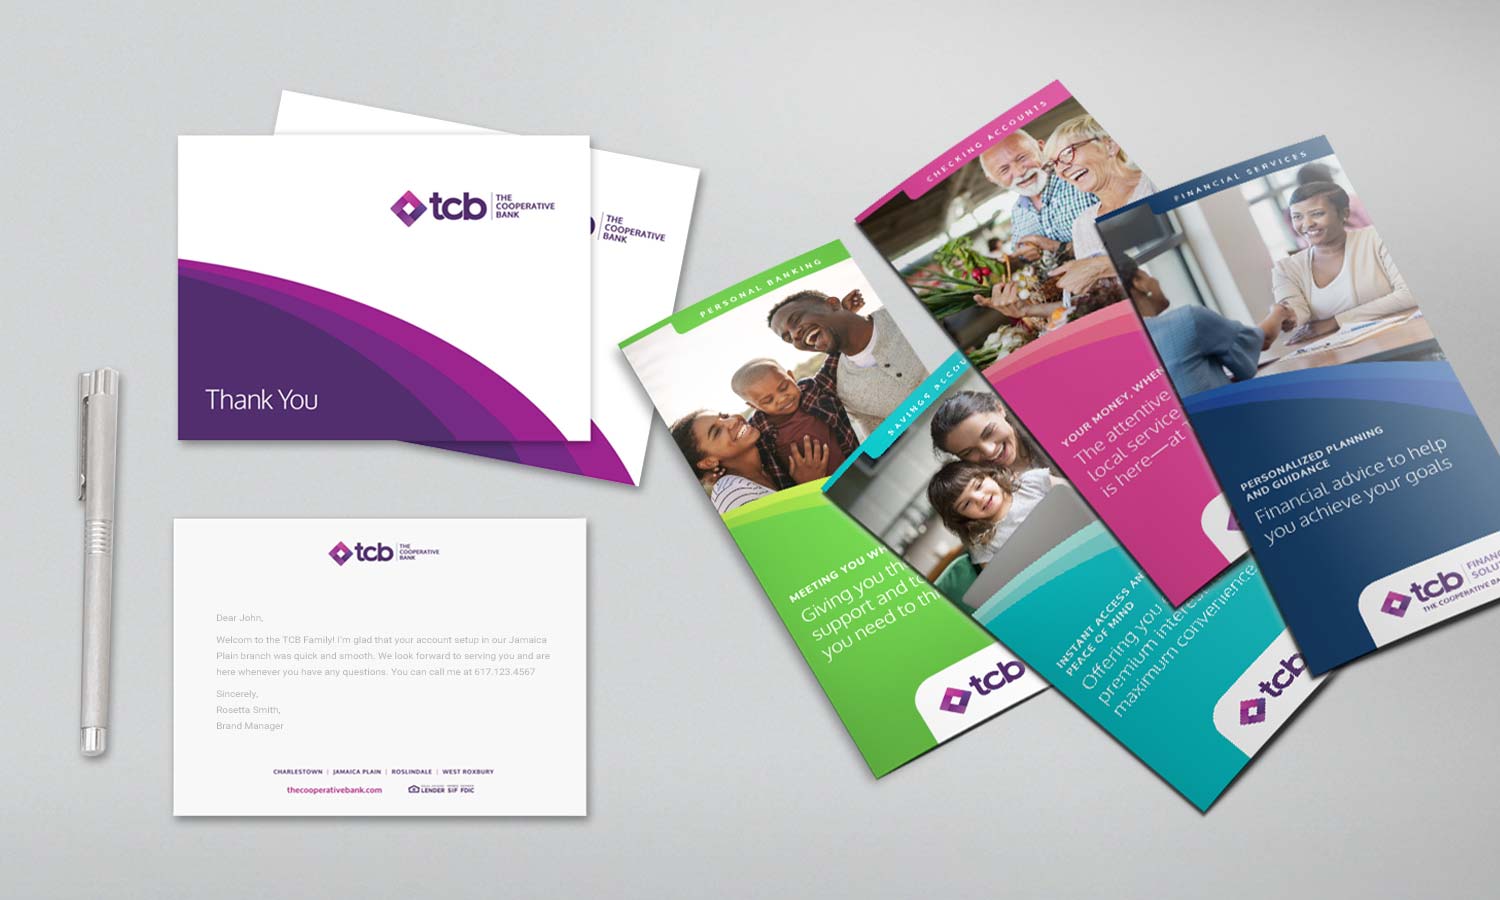 Marketing collateral for TCB including brochures and notecards